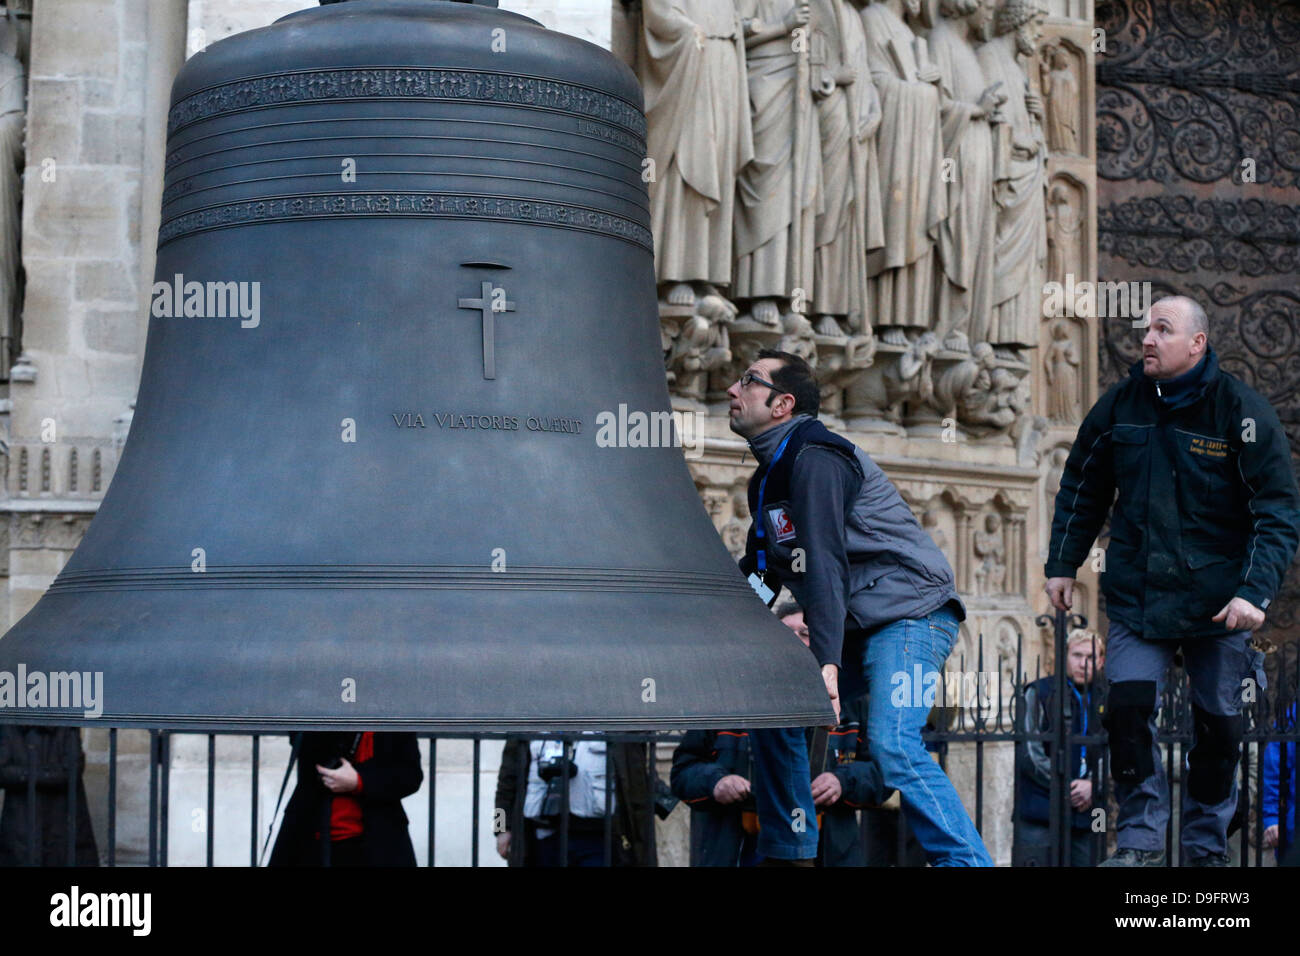 Arrival of the new bell chime, the biggest bell weighing six tons, on 850th anniversary of Notre Dame de Paris, Paris, France Stock Photo